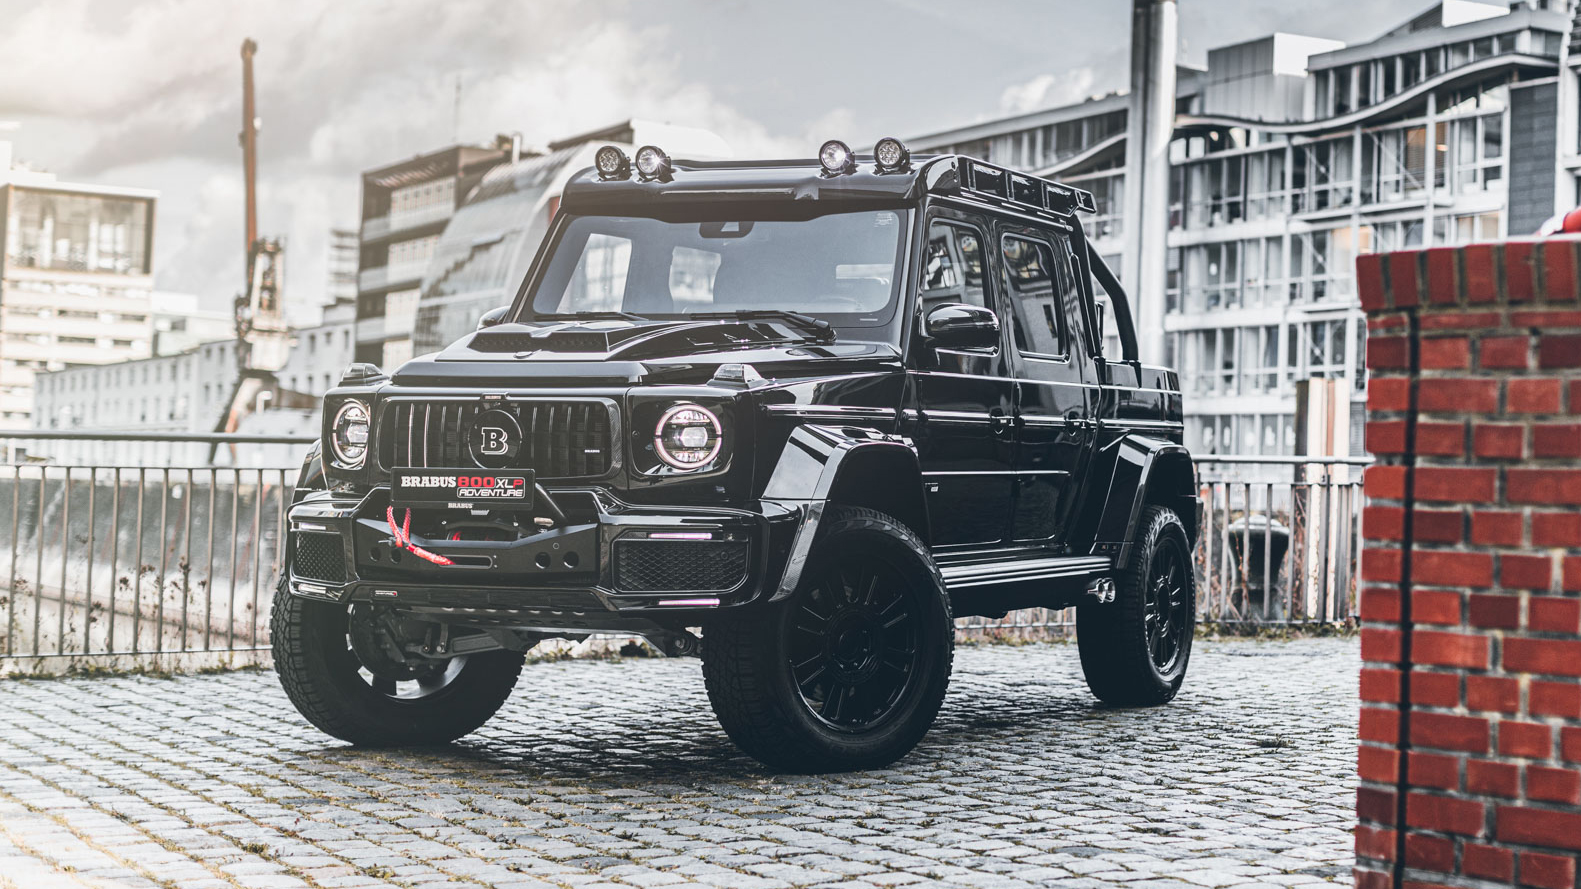 Brabus Has Given This G Wagen Pickup Truck 789bhp